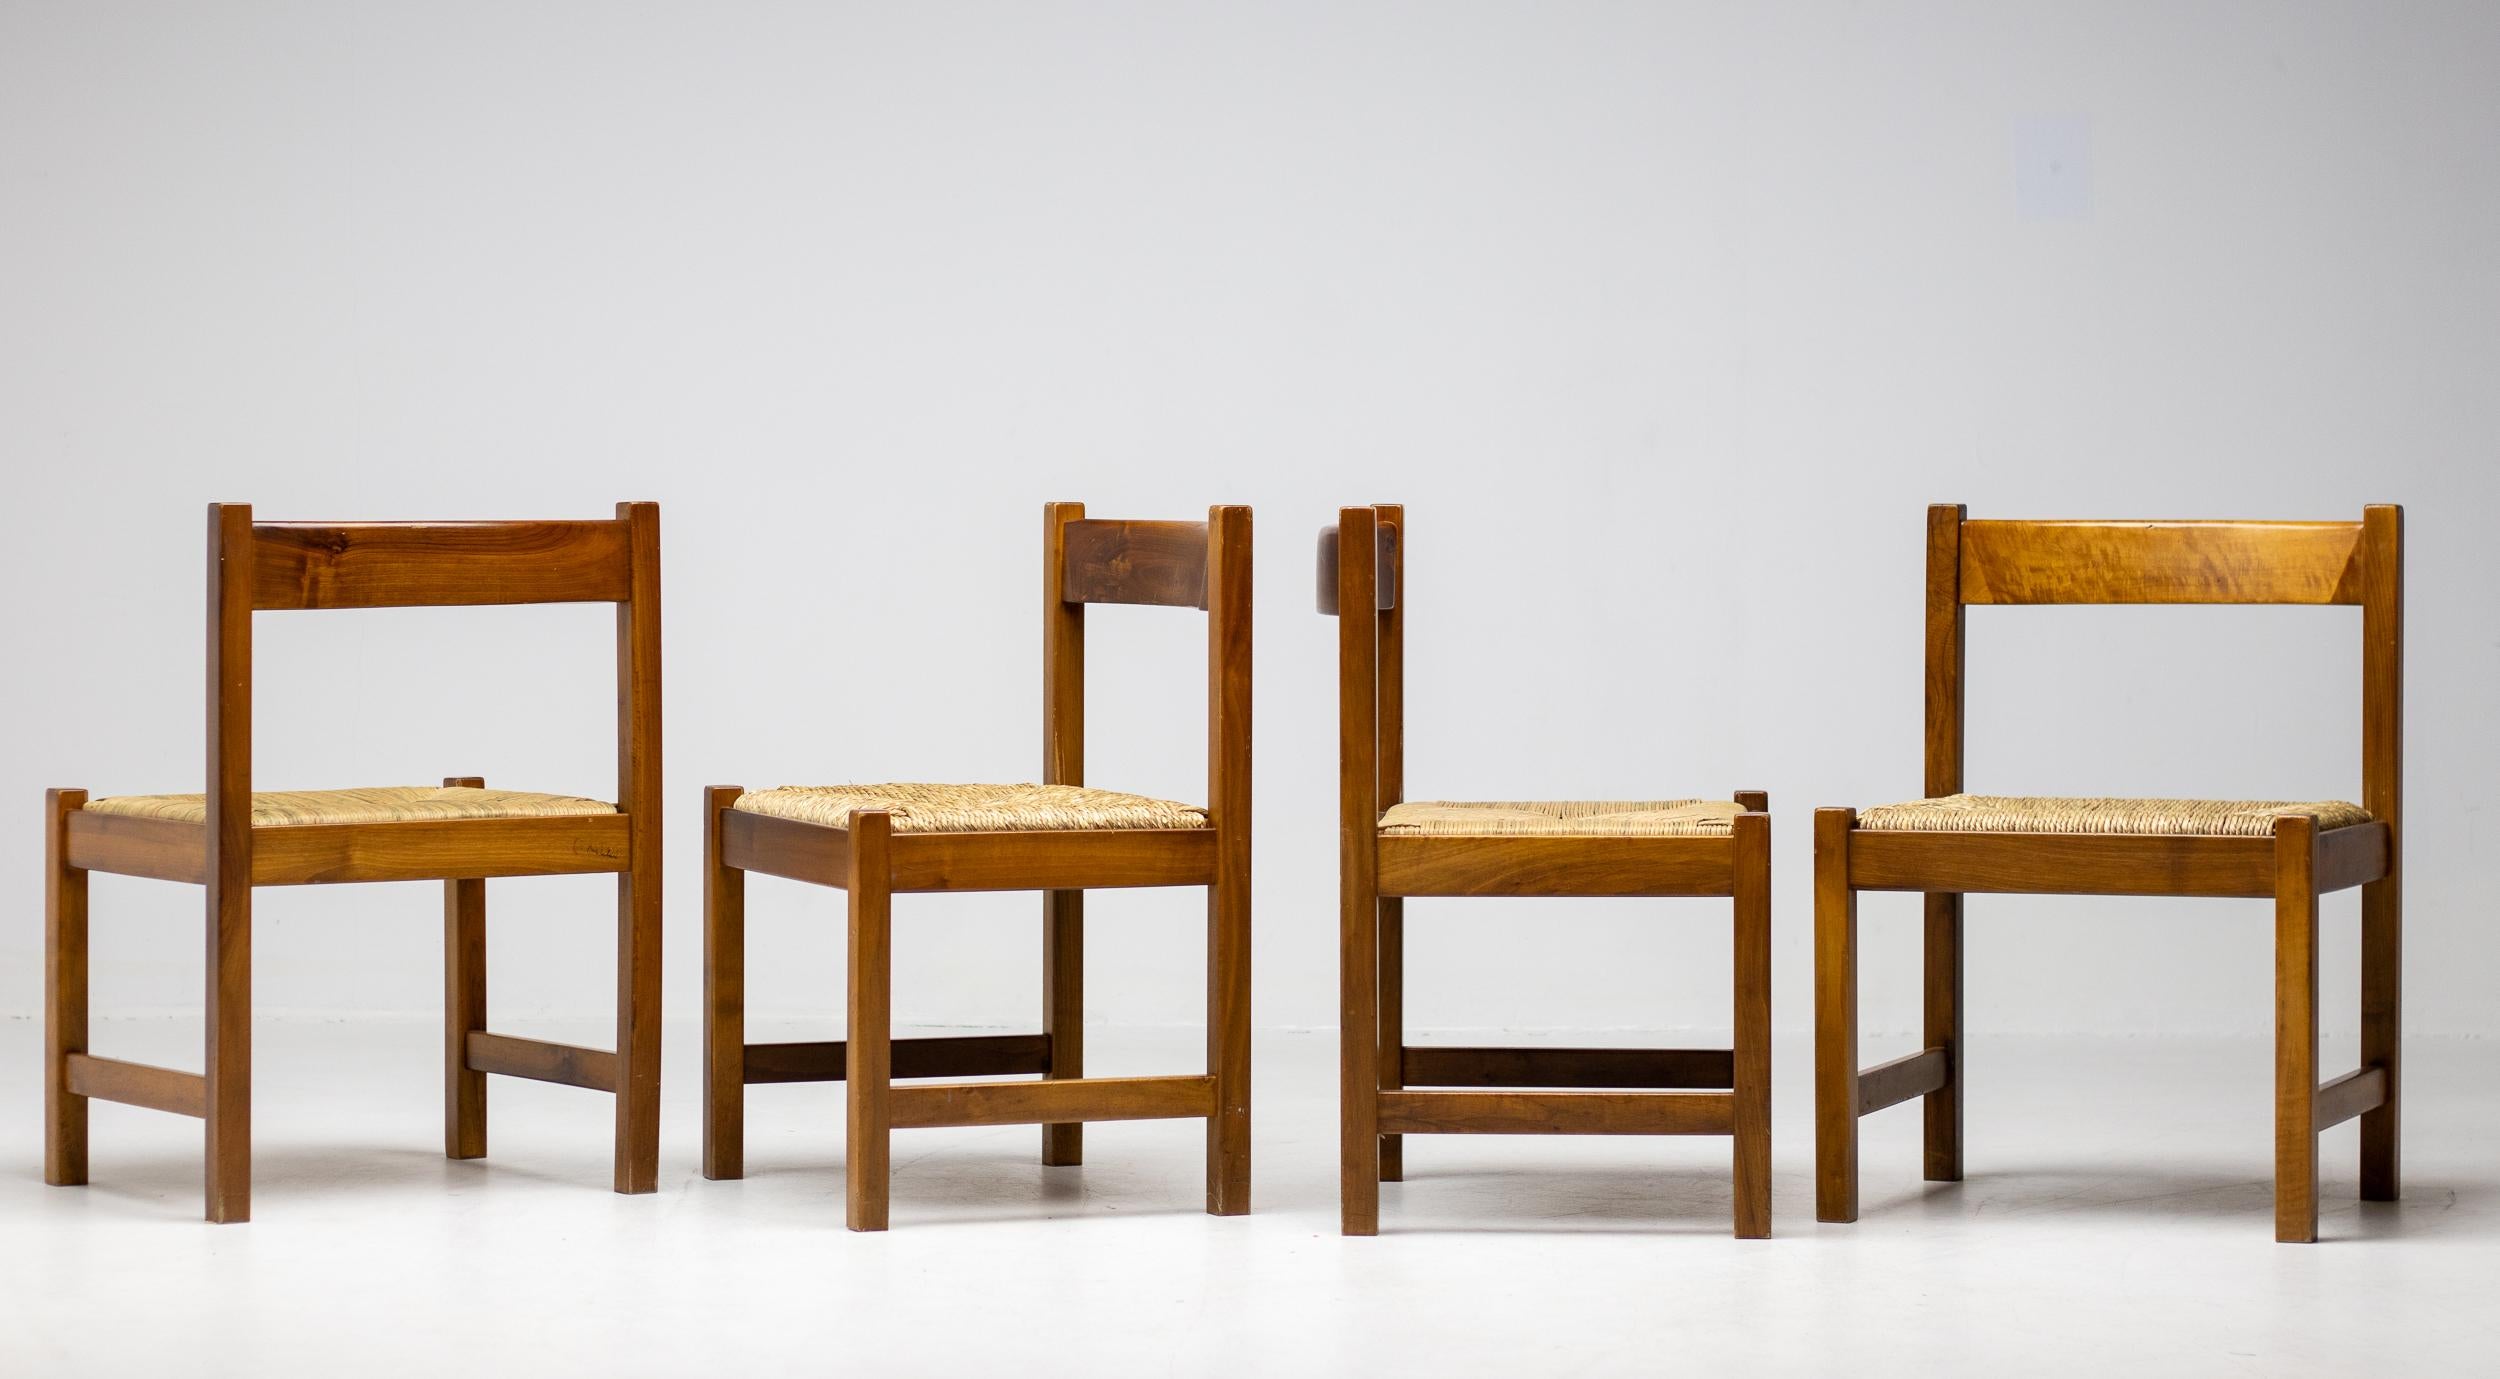 Set of 4 dining chairs from the Torbecchia series, designed by brutalist architect Giovanni Michelucci for Poltronova, 1964.  Solid walnut structure with seats upholstered in cane. 
This architectural set will enlighten your interior through its